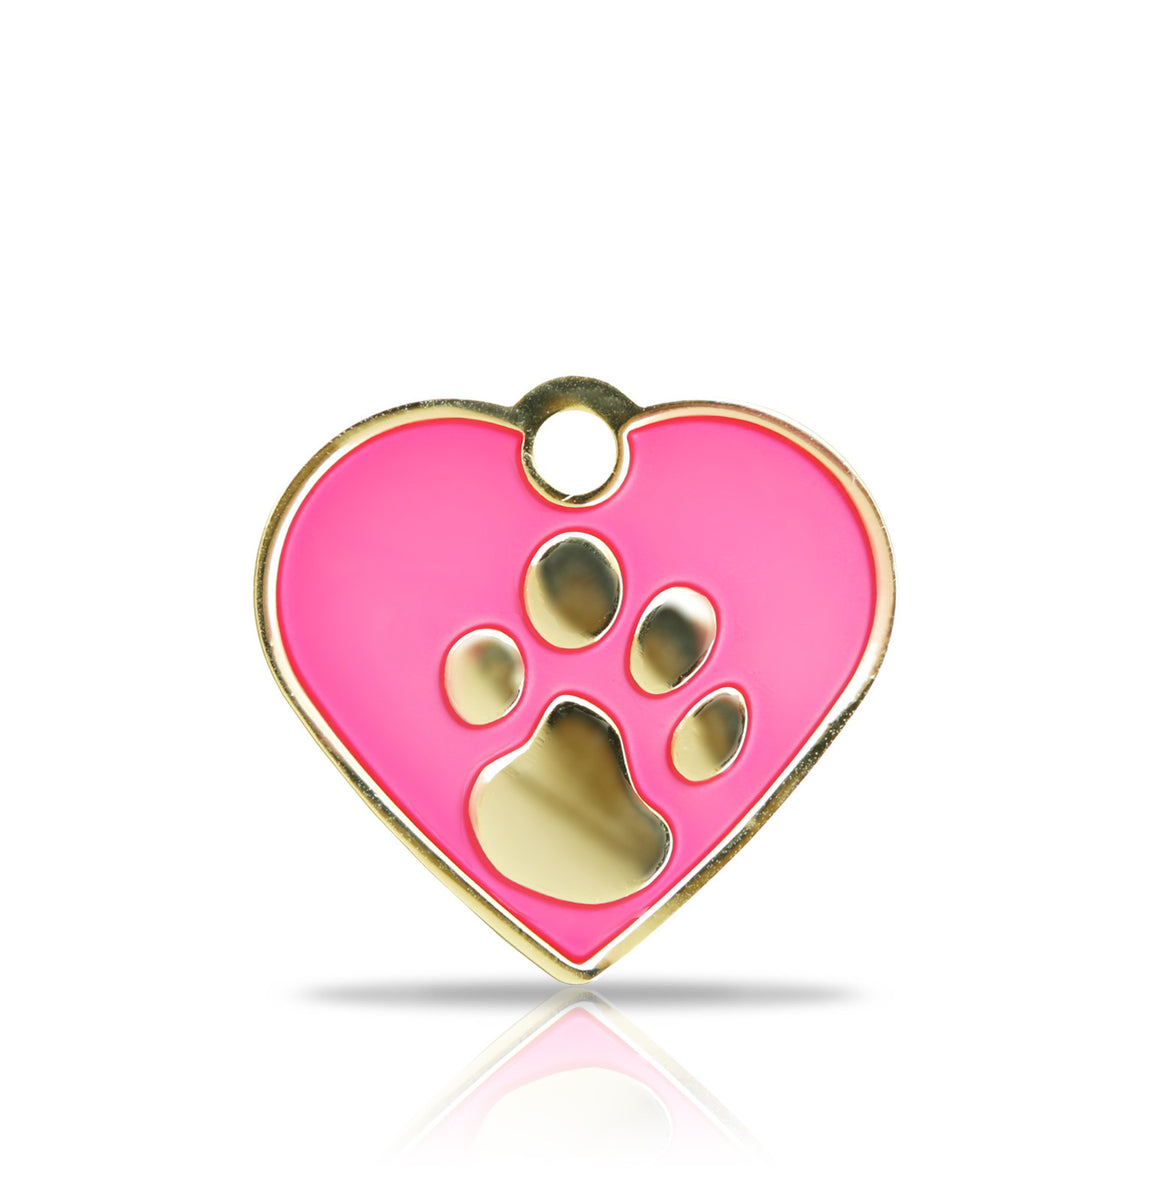 TaggIT Elegance Small Heart Pink & Gold iMarc Engraving Tag